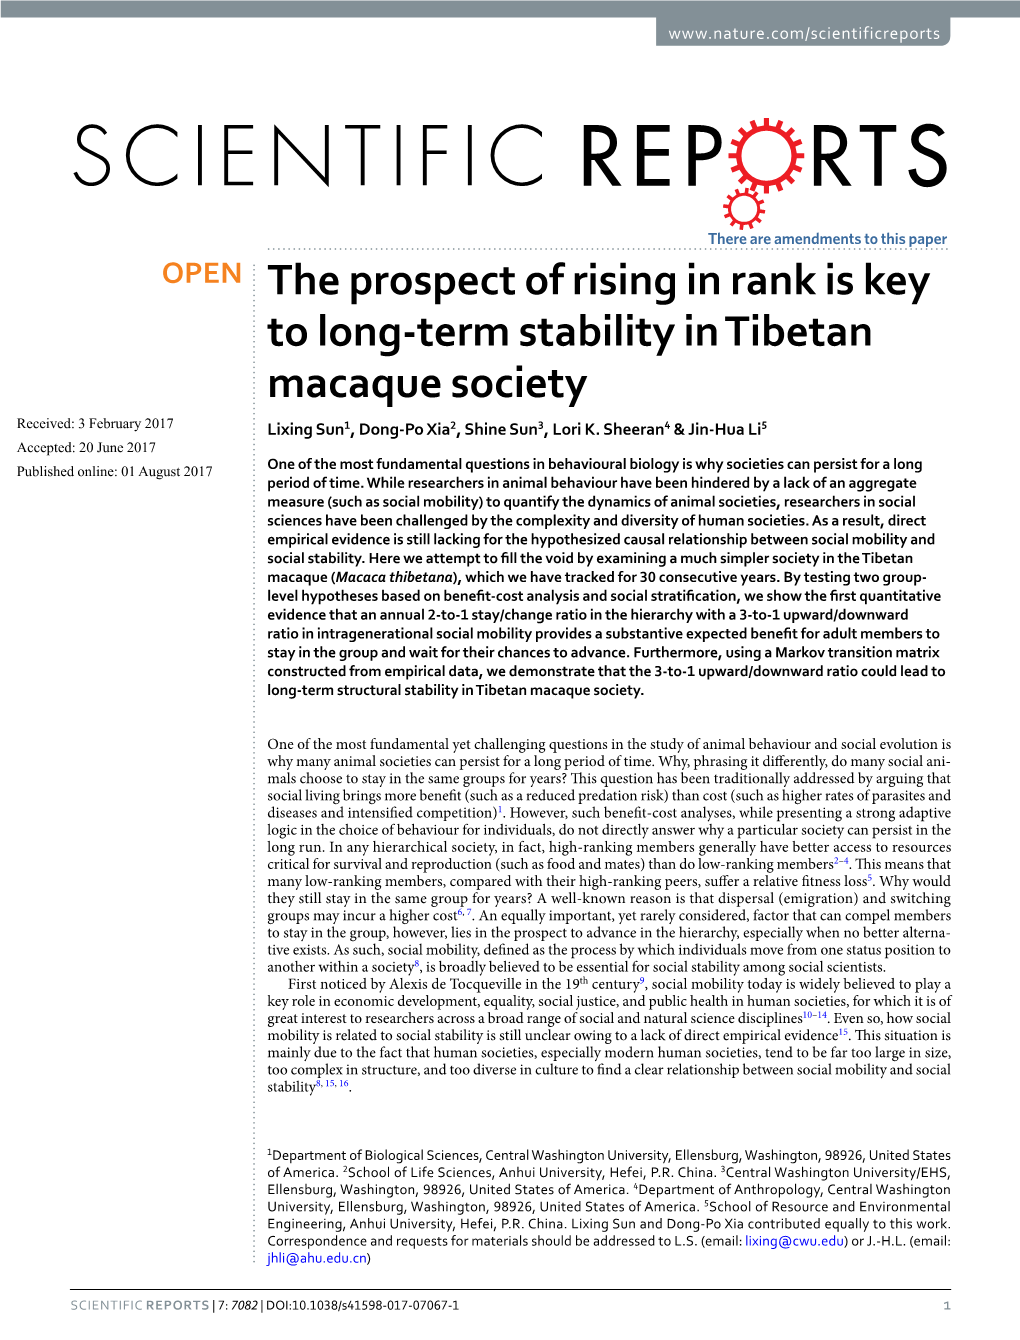 The Prospect of Rising in Rank Is Key to Long-Term Stability in Tibetan Macaque Society Received: 3 February 2017 Lixing Sun1, Dong-Po Xia2, Shine Sun3, Lori K